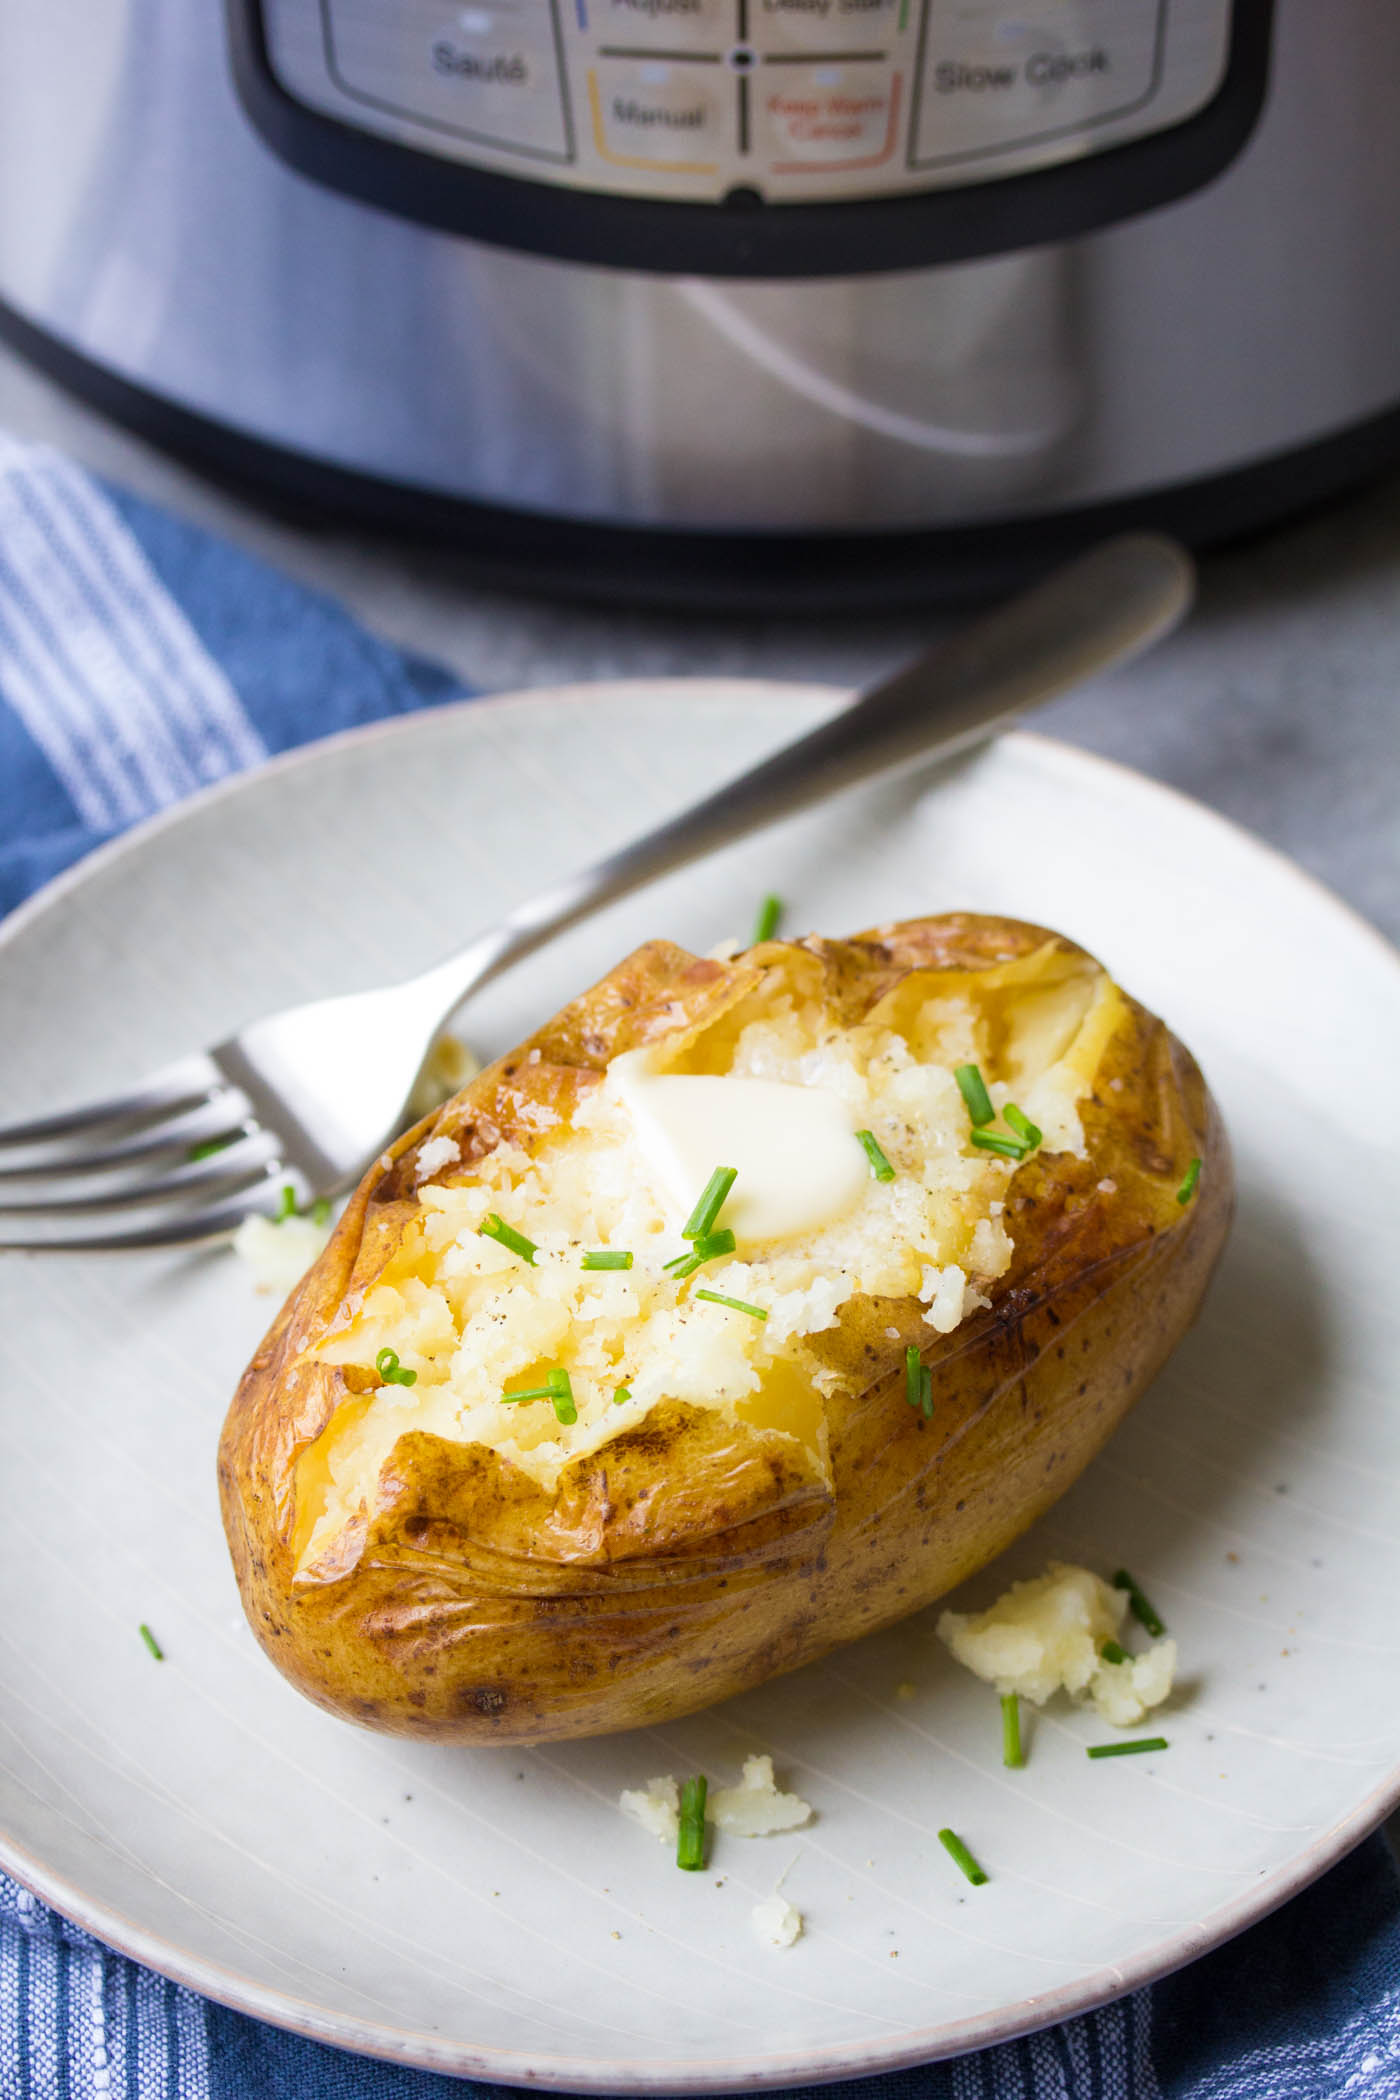 Baked potato topped with salt, pepper, butter and chives, with instant pot in the background.